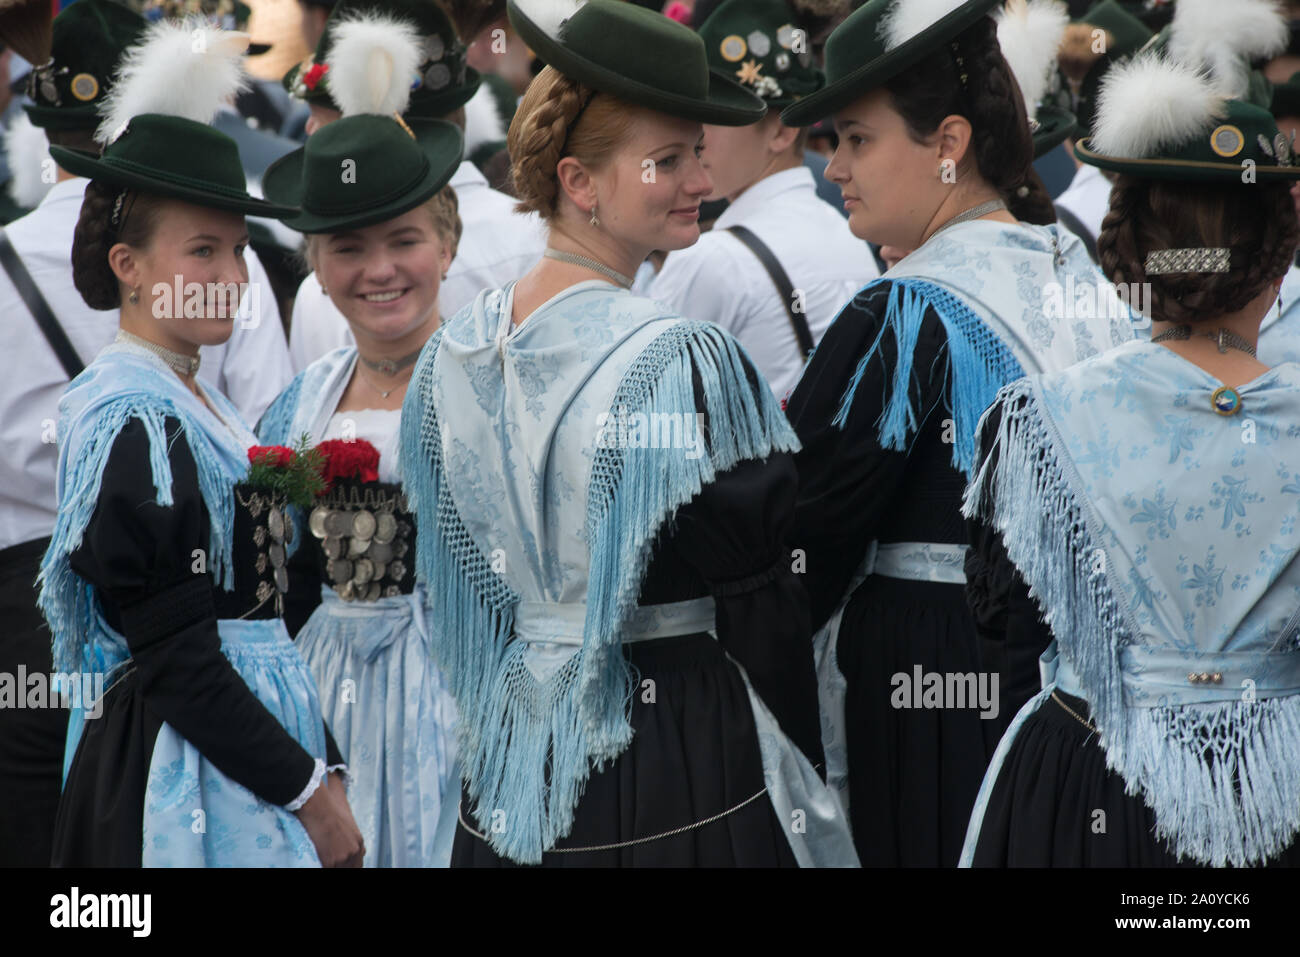 young women in Bavarian traditional costumes, seen before the costume parade on the occasion of Oktoberfest in Munich Stock Photo